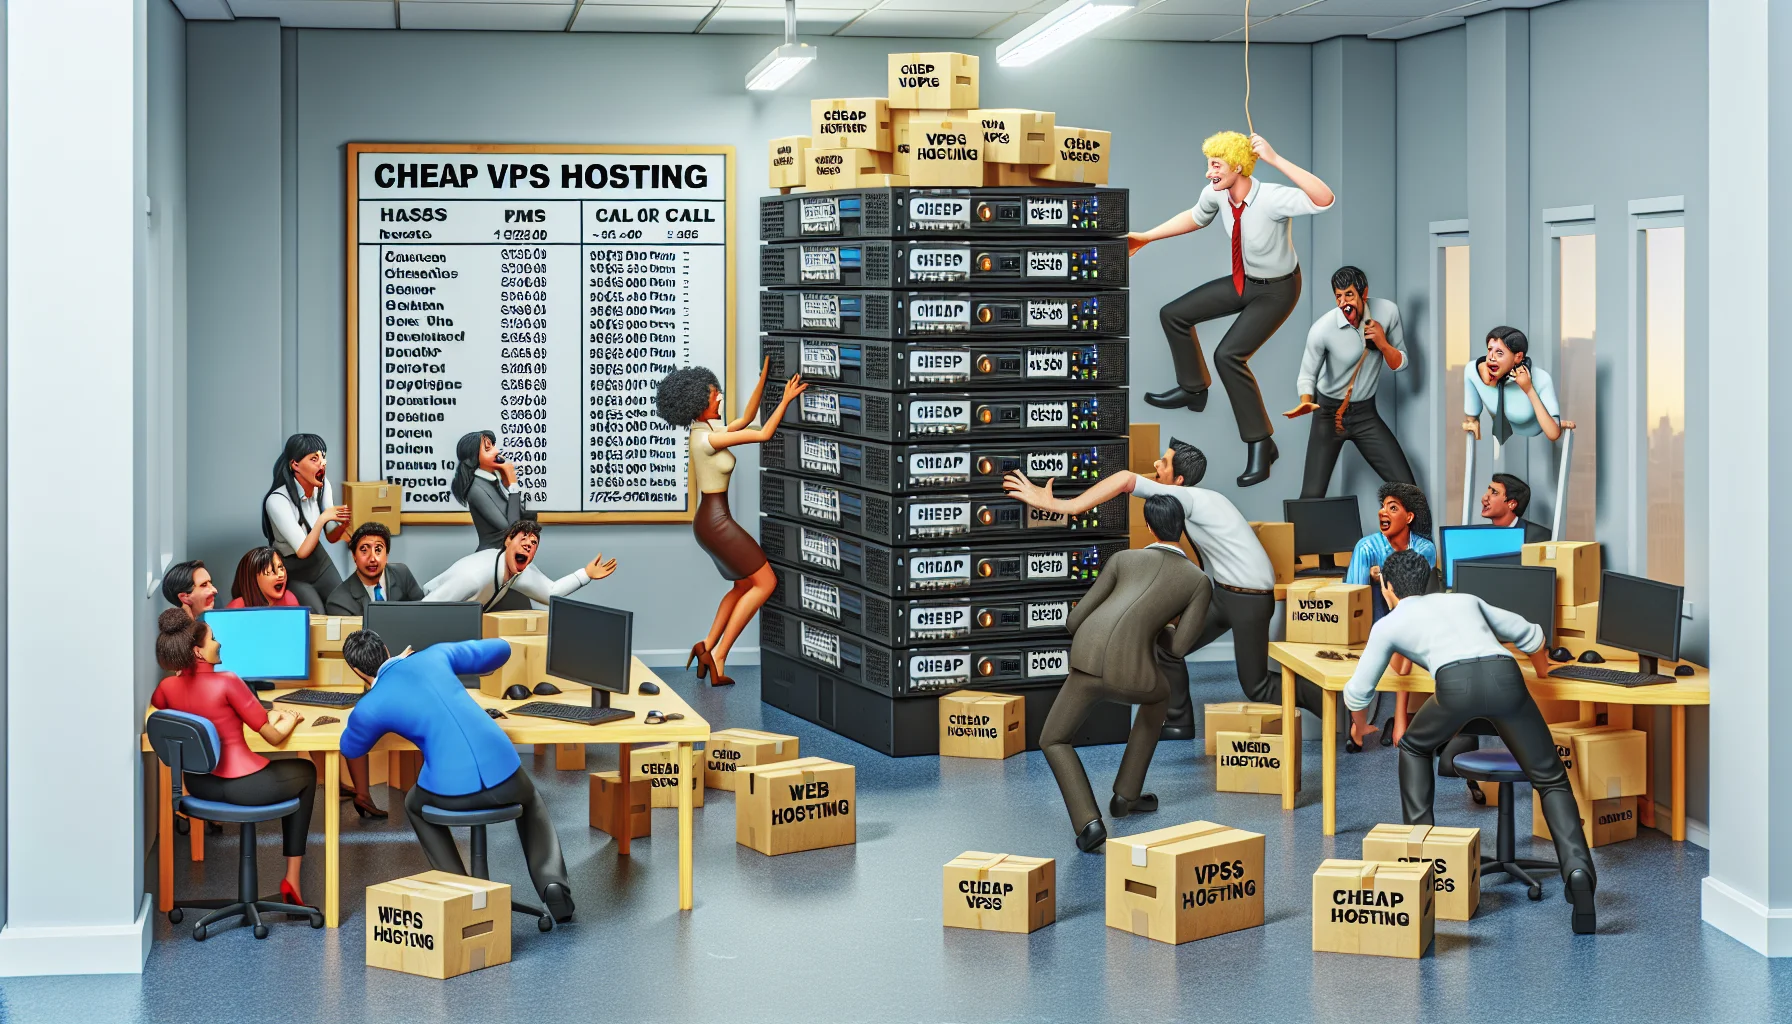 Imagine a humorous situation set in a small-sized, bustling office environment. There are various servers stacked up precariously, all labeled 'Cheap VPS Hosting'. The office is brightly lit with a white board displaying web hosting plan details. Employees of different genders and descents - Caucasian, African, Hispanic, Middle-Eastern, South Asian, and Asian - are animatedly engaging in tasks. One employee, a Hispanic female, is dexterously maintaining the balance of servers, while another, an Asian male, is hastily answering call after call, all amidst peals of laughter. The overall scene emphasizes the affordability and efficiency of the VPS Hosting.